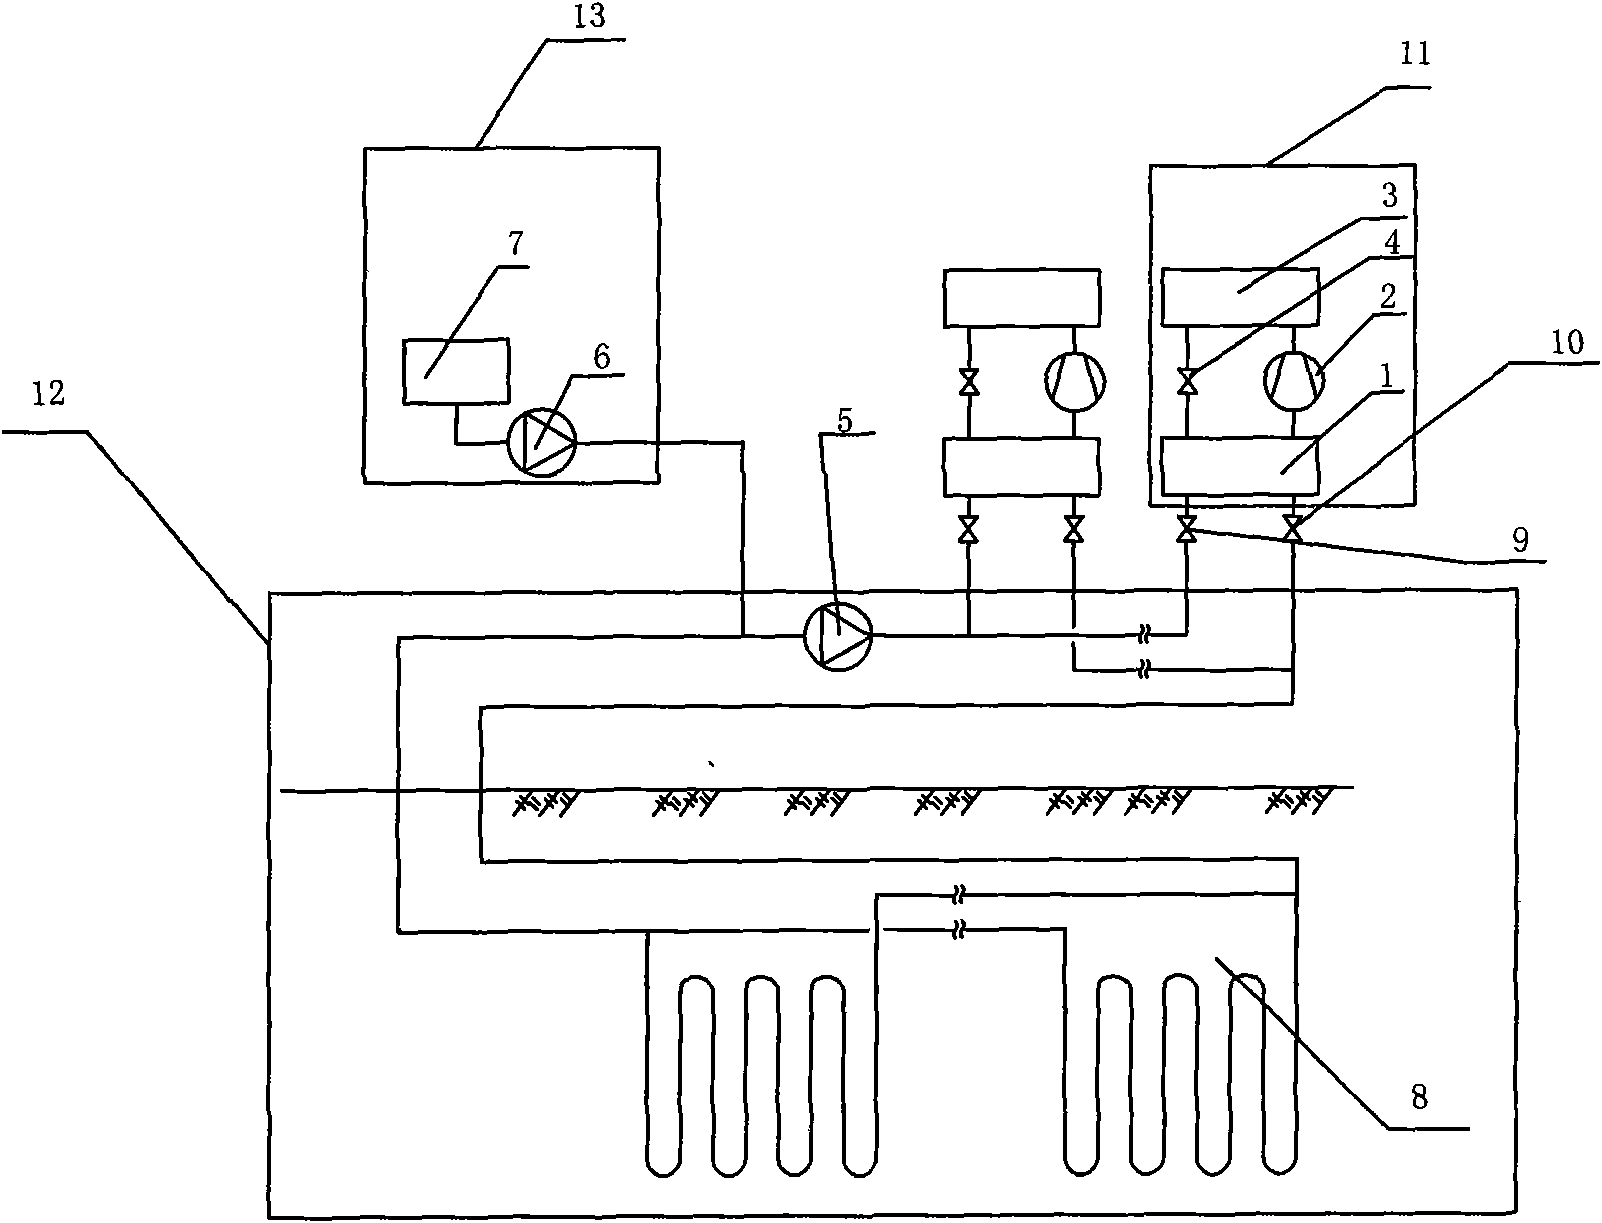 Ground source heat pump system for recovering heat of wind in tunnel